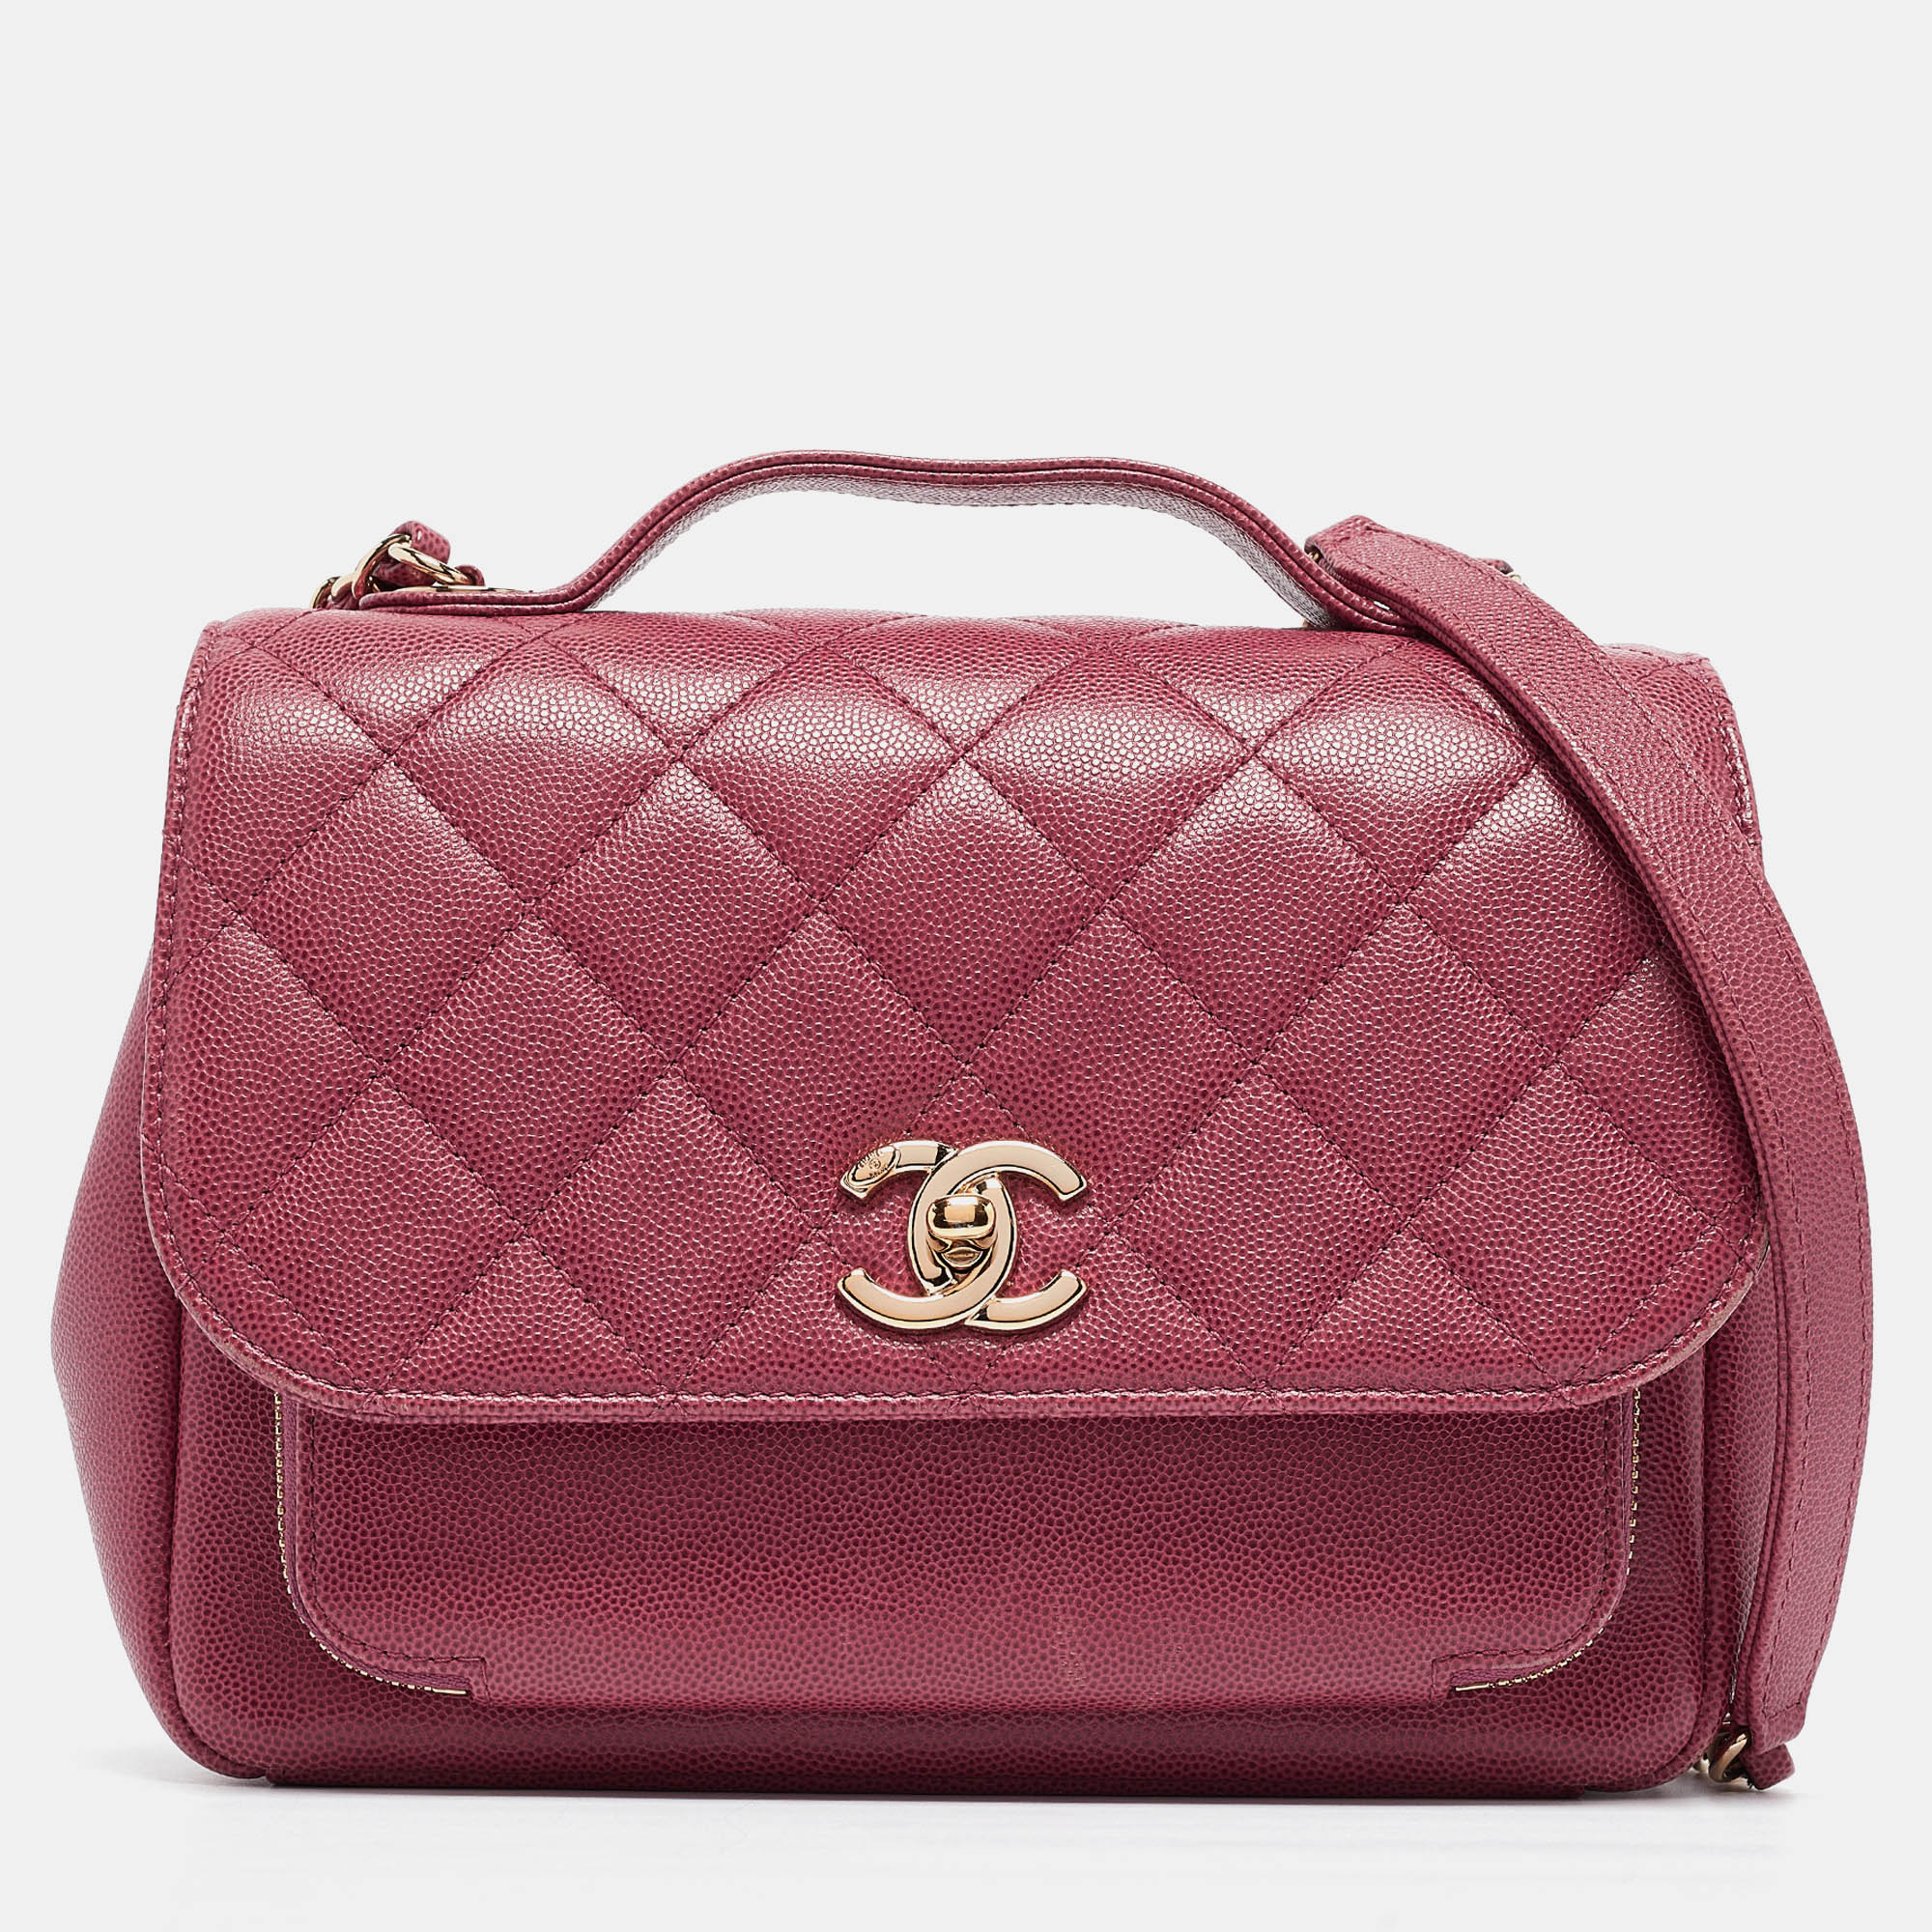 Chanels luxurious Business Affinity Chain Flap bag is a must have in a well curated wardrobe This stunning bag has a masterfully crafted Caviar leather exterior with gold tone hardware and the iconic CC logo on the front. This pink flap bag is complete with a top handle and strap.